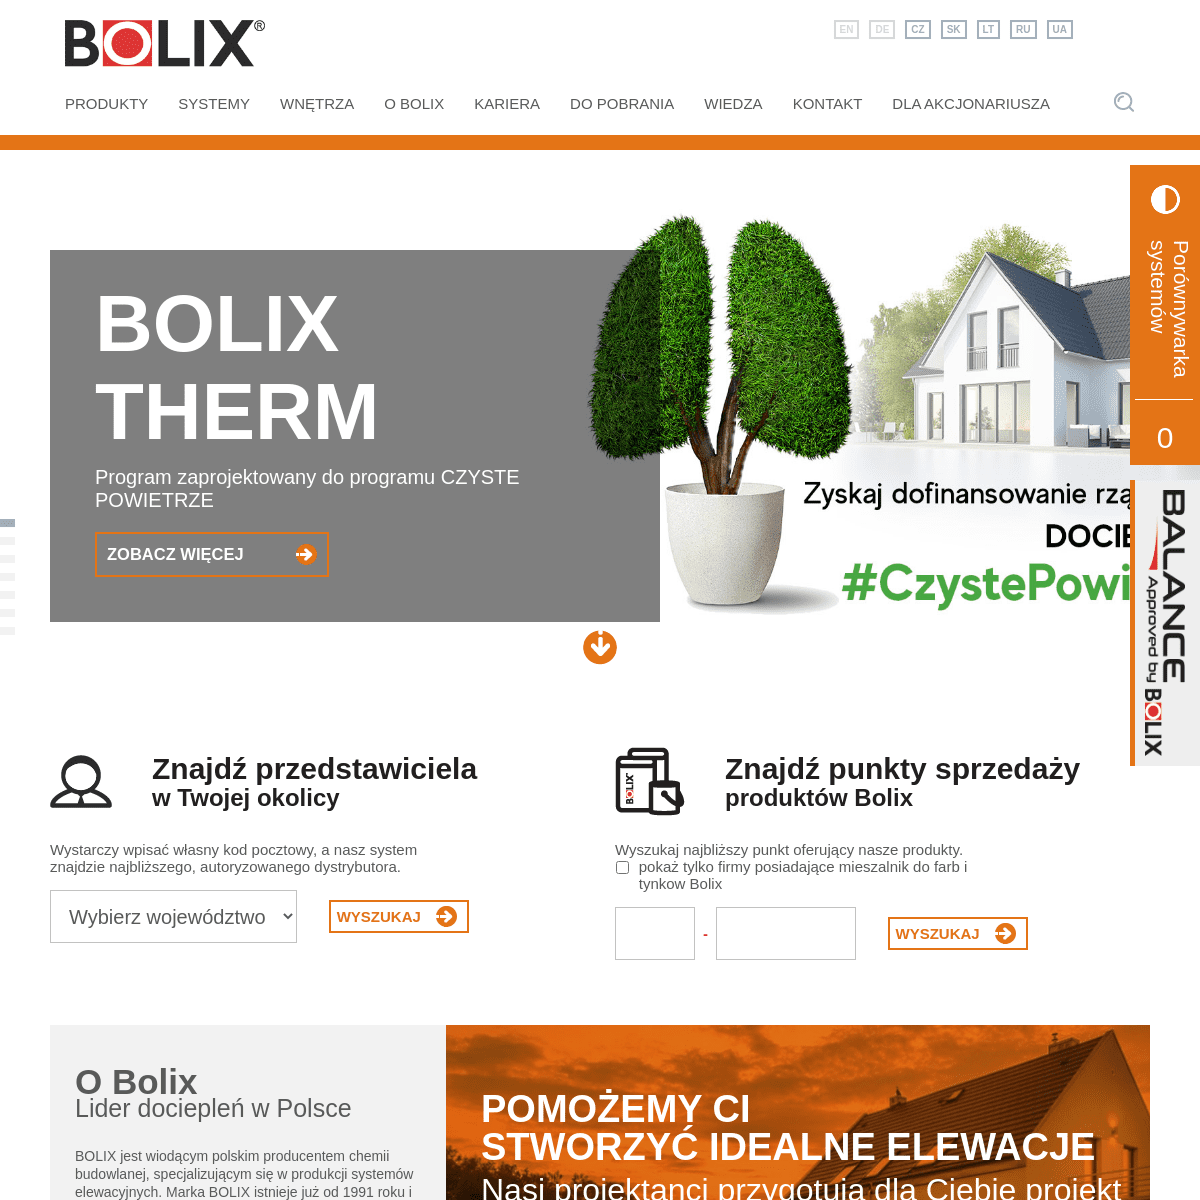 A complete backup of https://bolix.pl